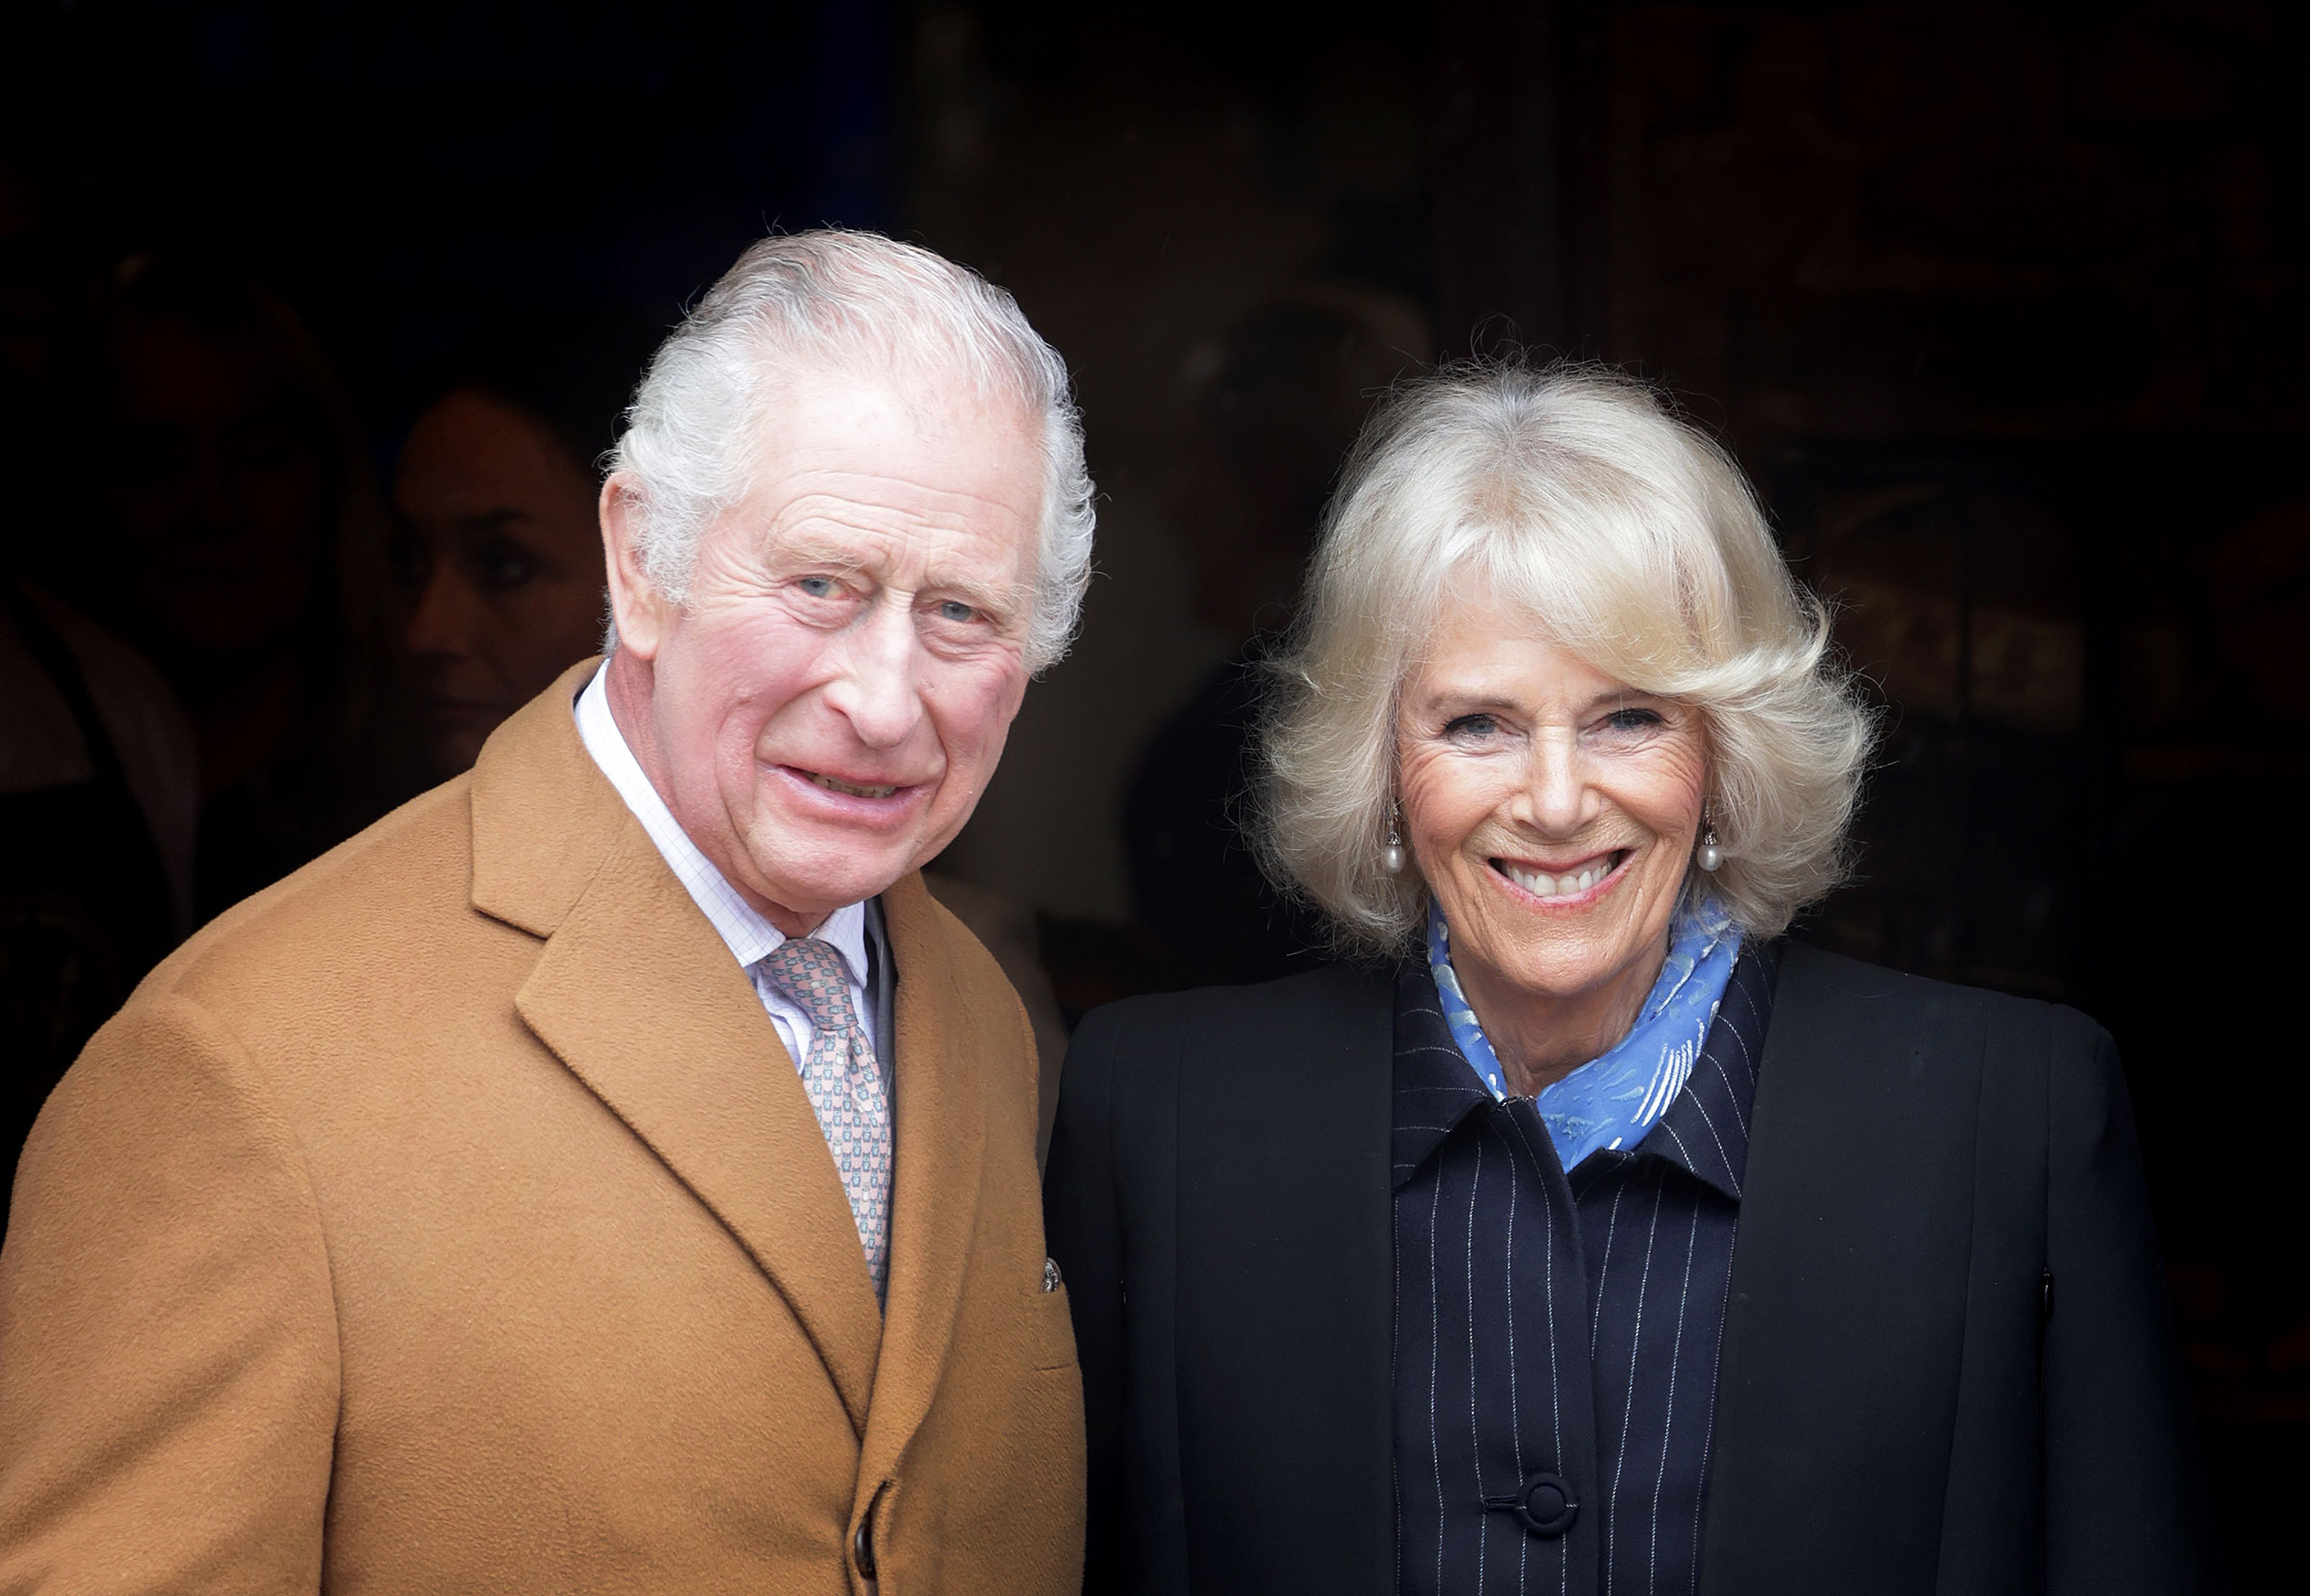 King Charles III and Camilla, Queen Consort visit Talbot Yard Food Court in Malton, England, on April 5, 2023. (Chris Jackson—Getty Images)